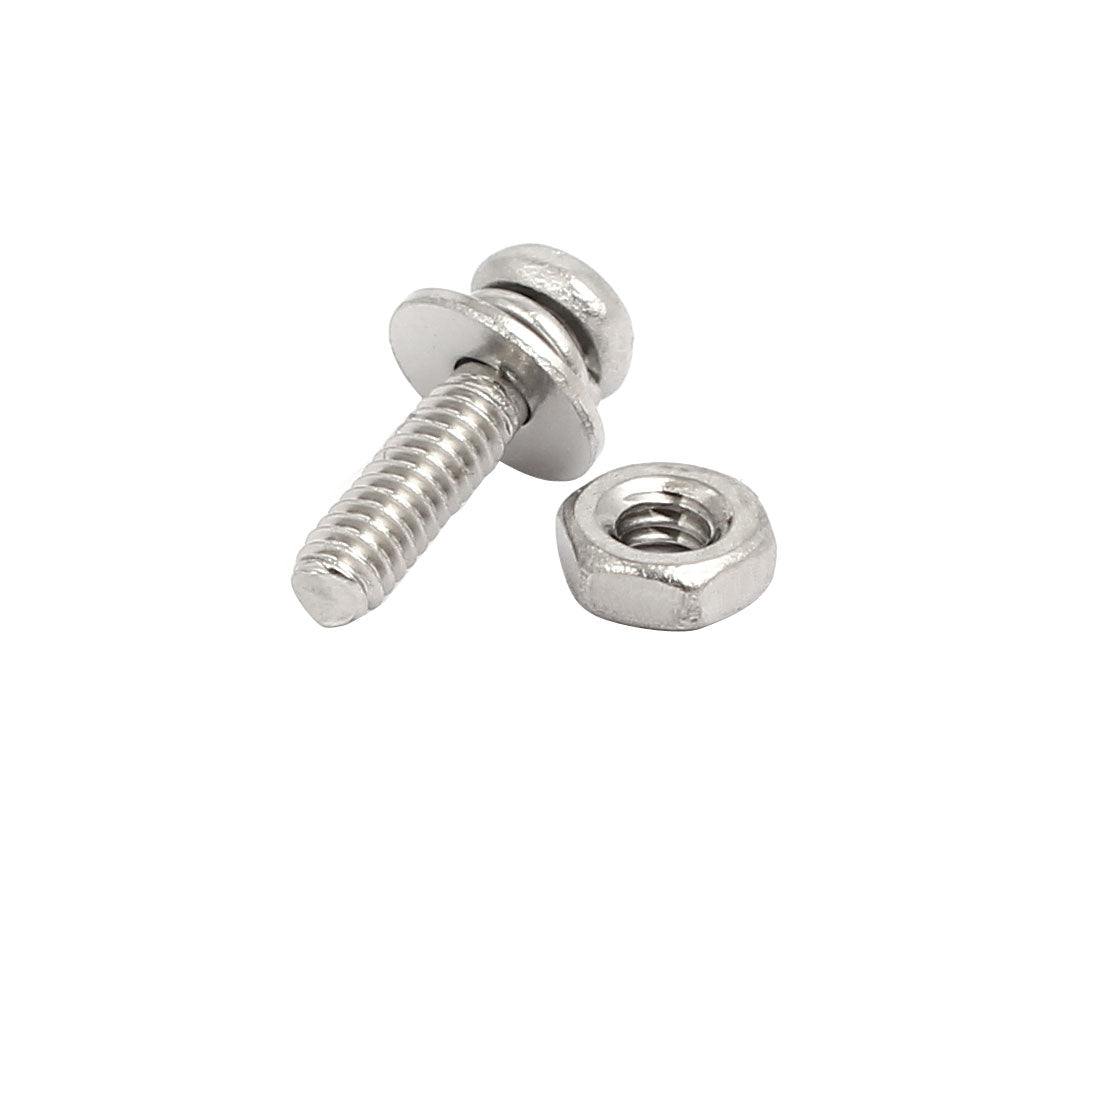 uxcell Uxcell M2x8mm 304 Stainless Steel Phillips Pan Head Bolt Screw Nut w Washer 25 Sets